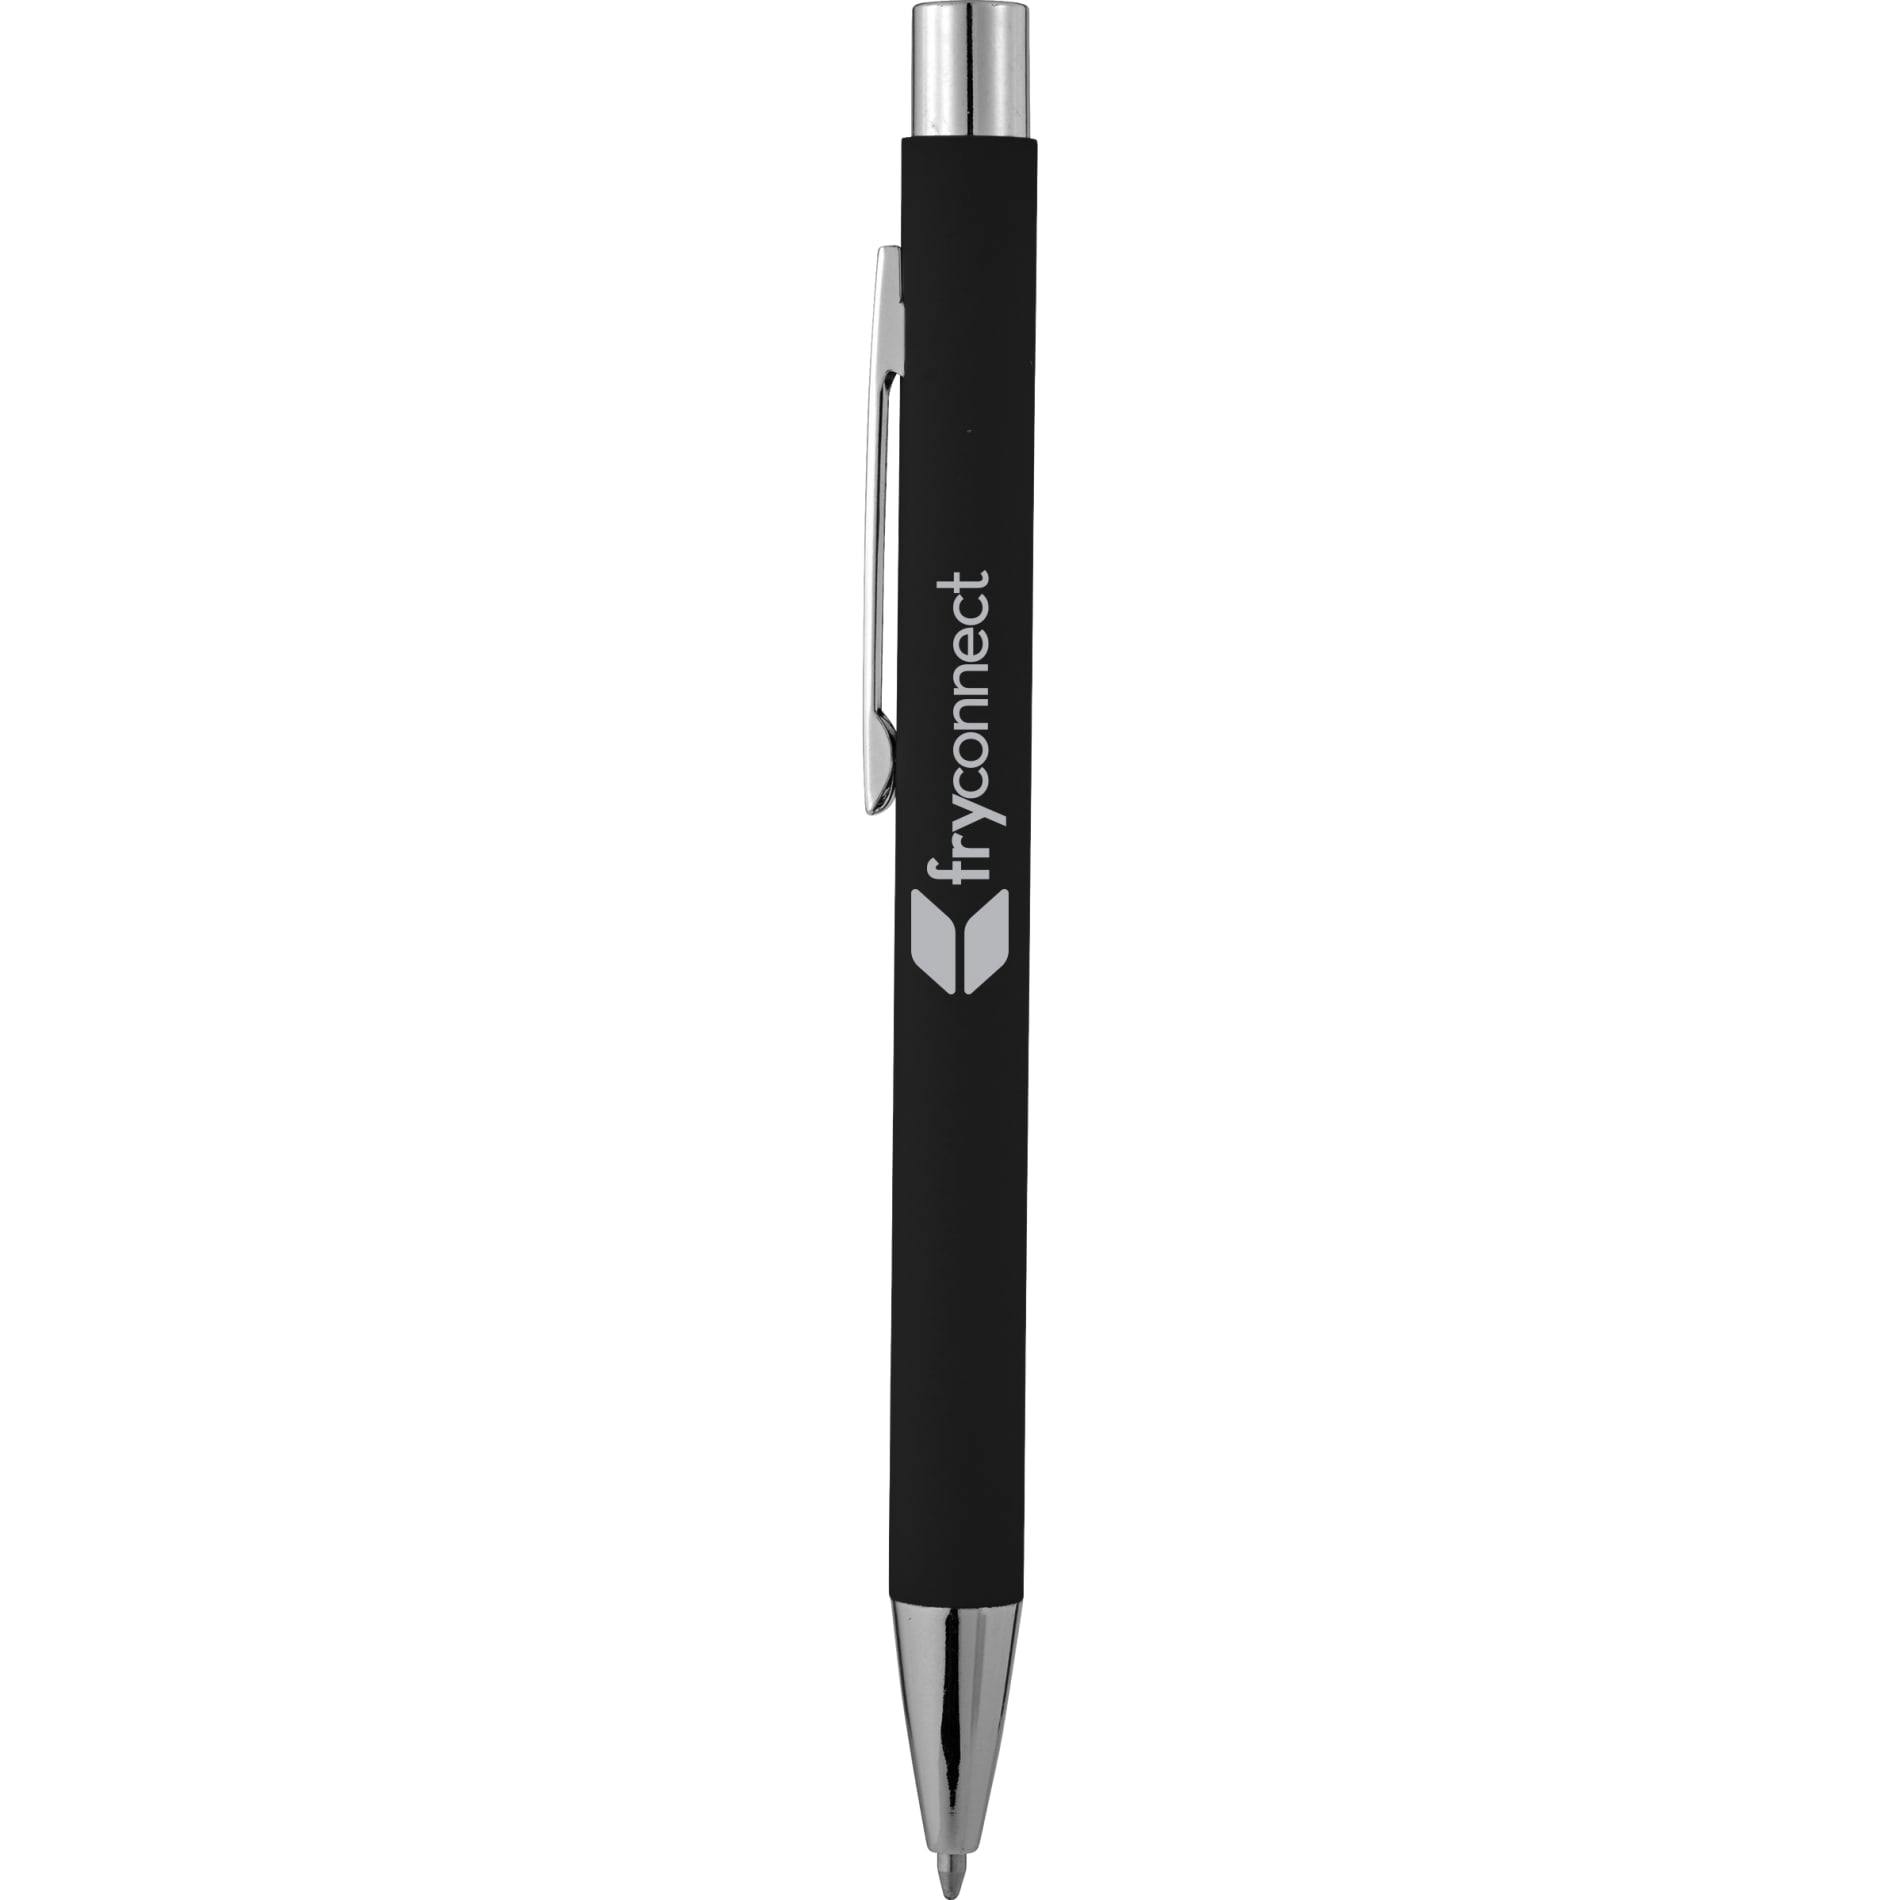 The Maven Soft Touch Metal Pen - additional Image 3